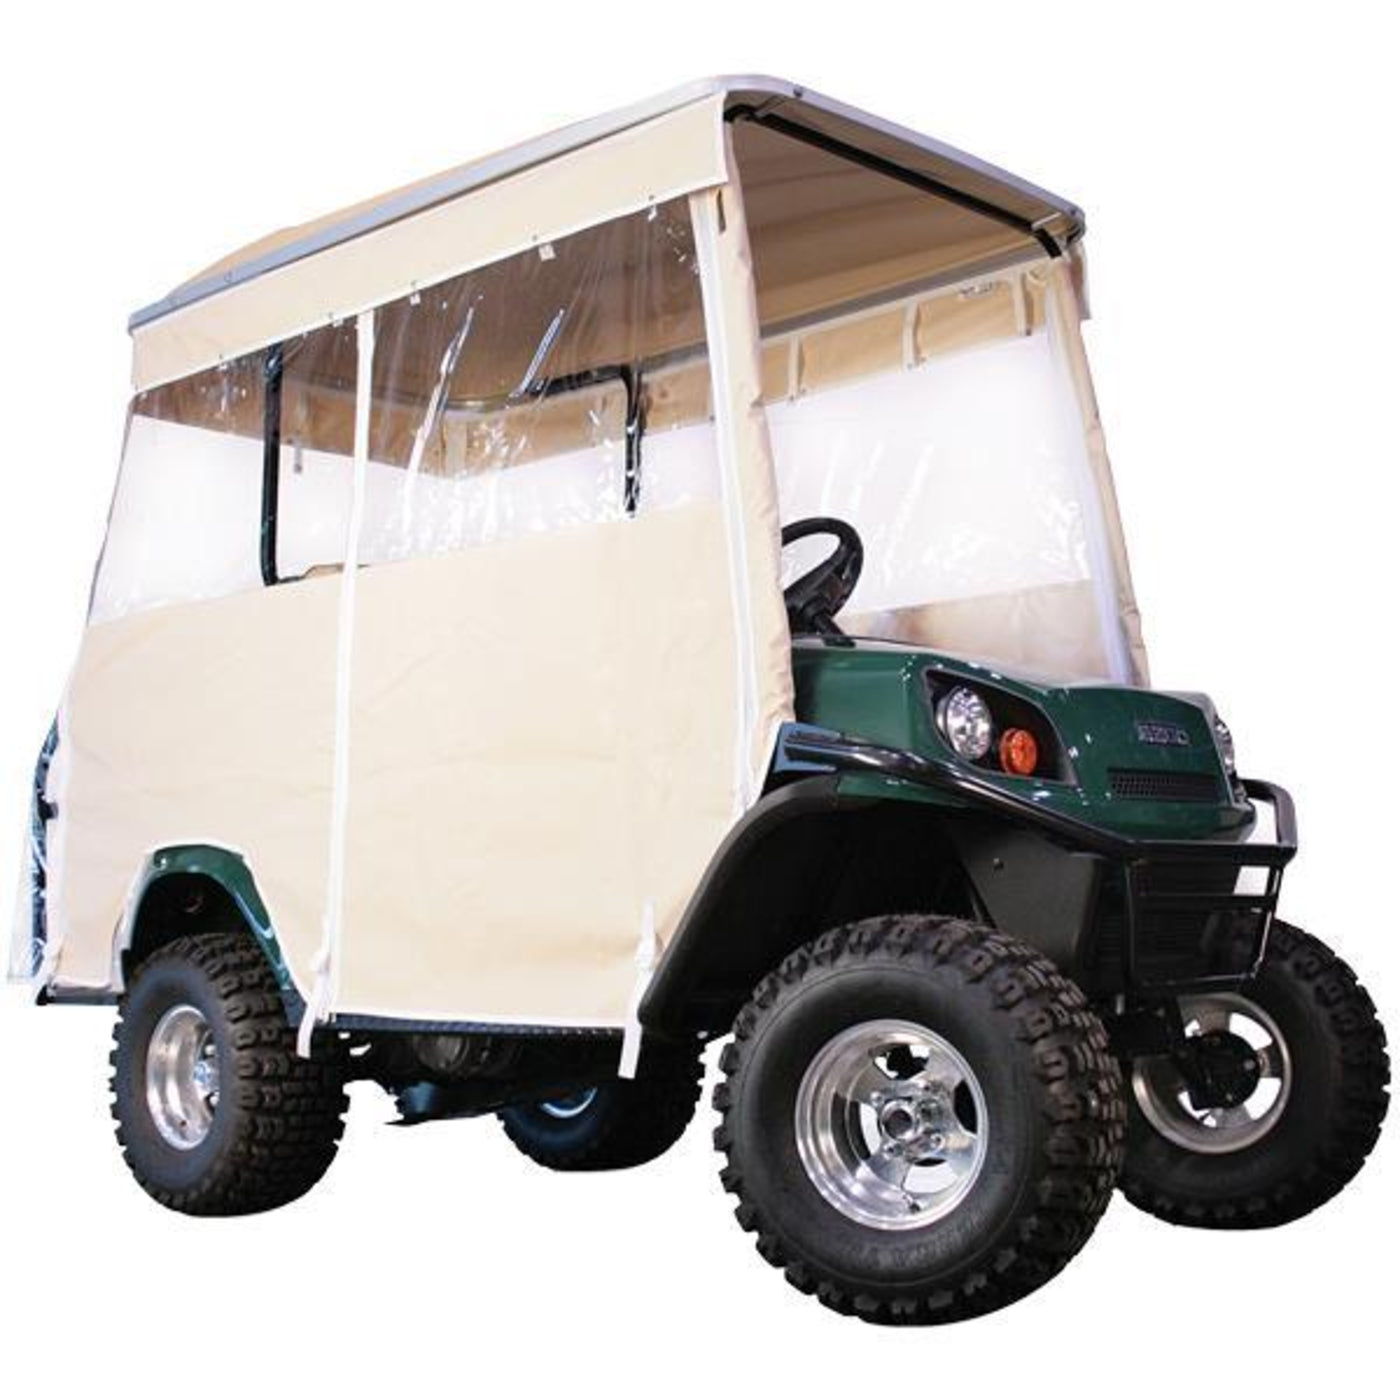 Ivory 4-Passenger Track Style Vinyl Enclosure For Yamaha G29/Drive w/116" Stretch/Eagle Top w/Sweater Basket